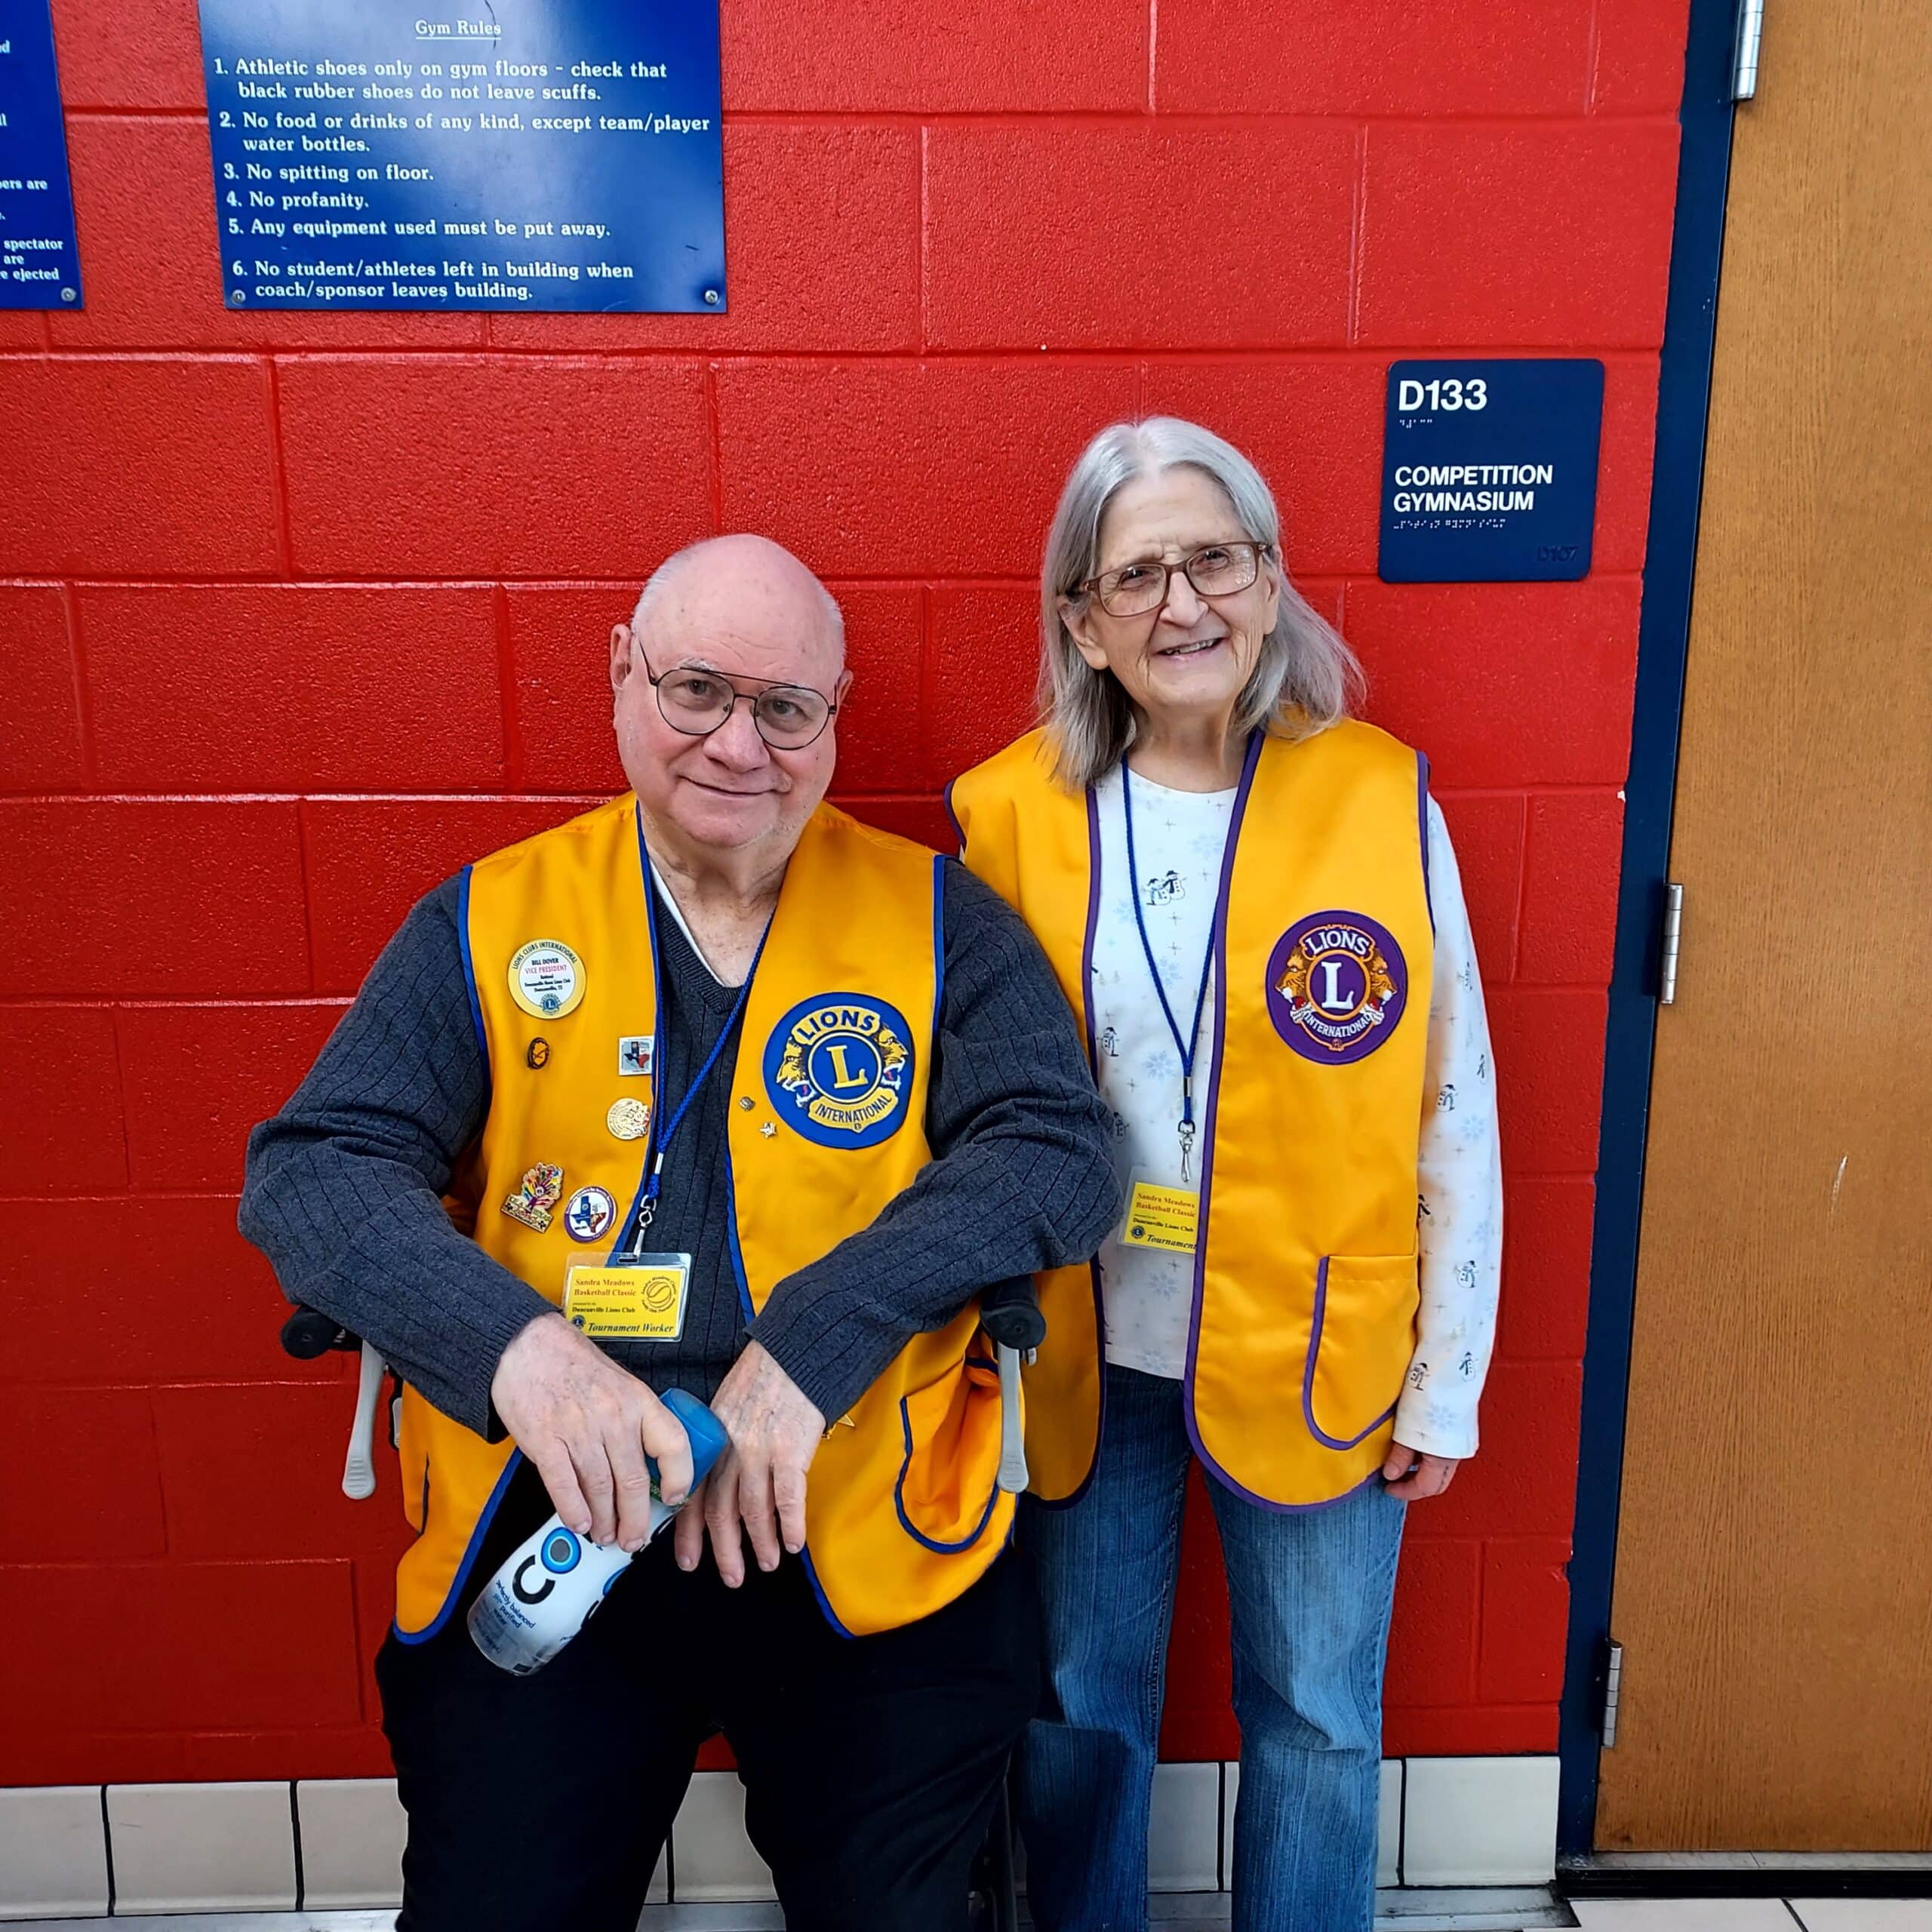 Lions Club workers